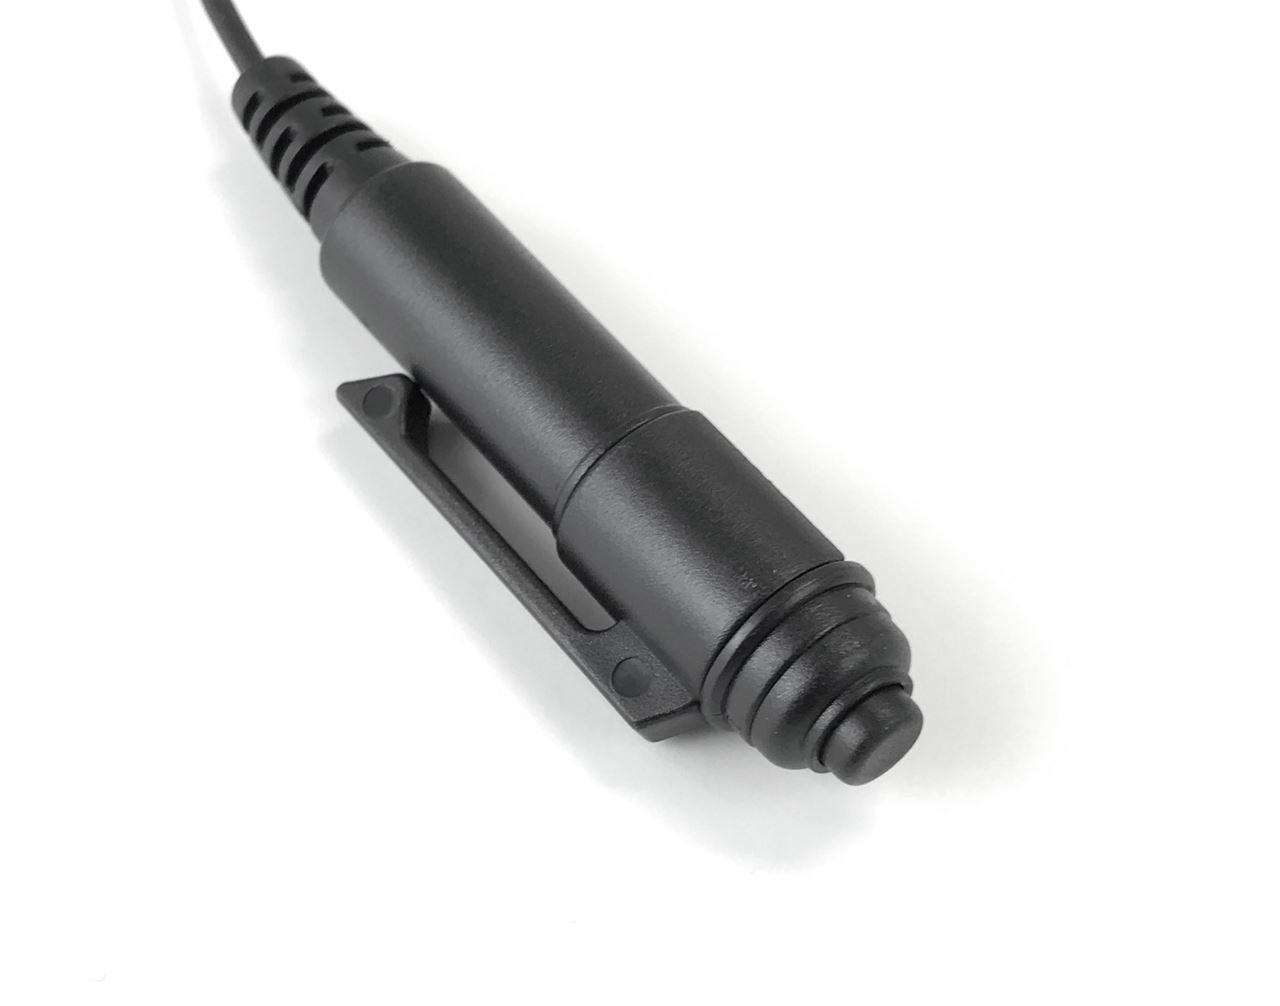 Comparable KHS-12 3 wire mini lapel mic with earphone for use with the Kenwood NX-5200 Portable Radio - Waveband Communications